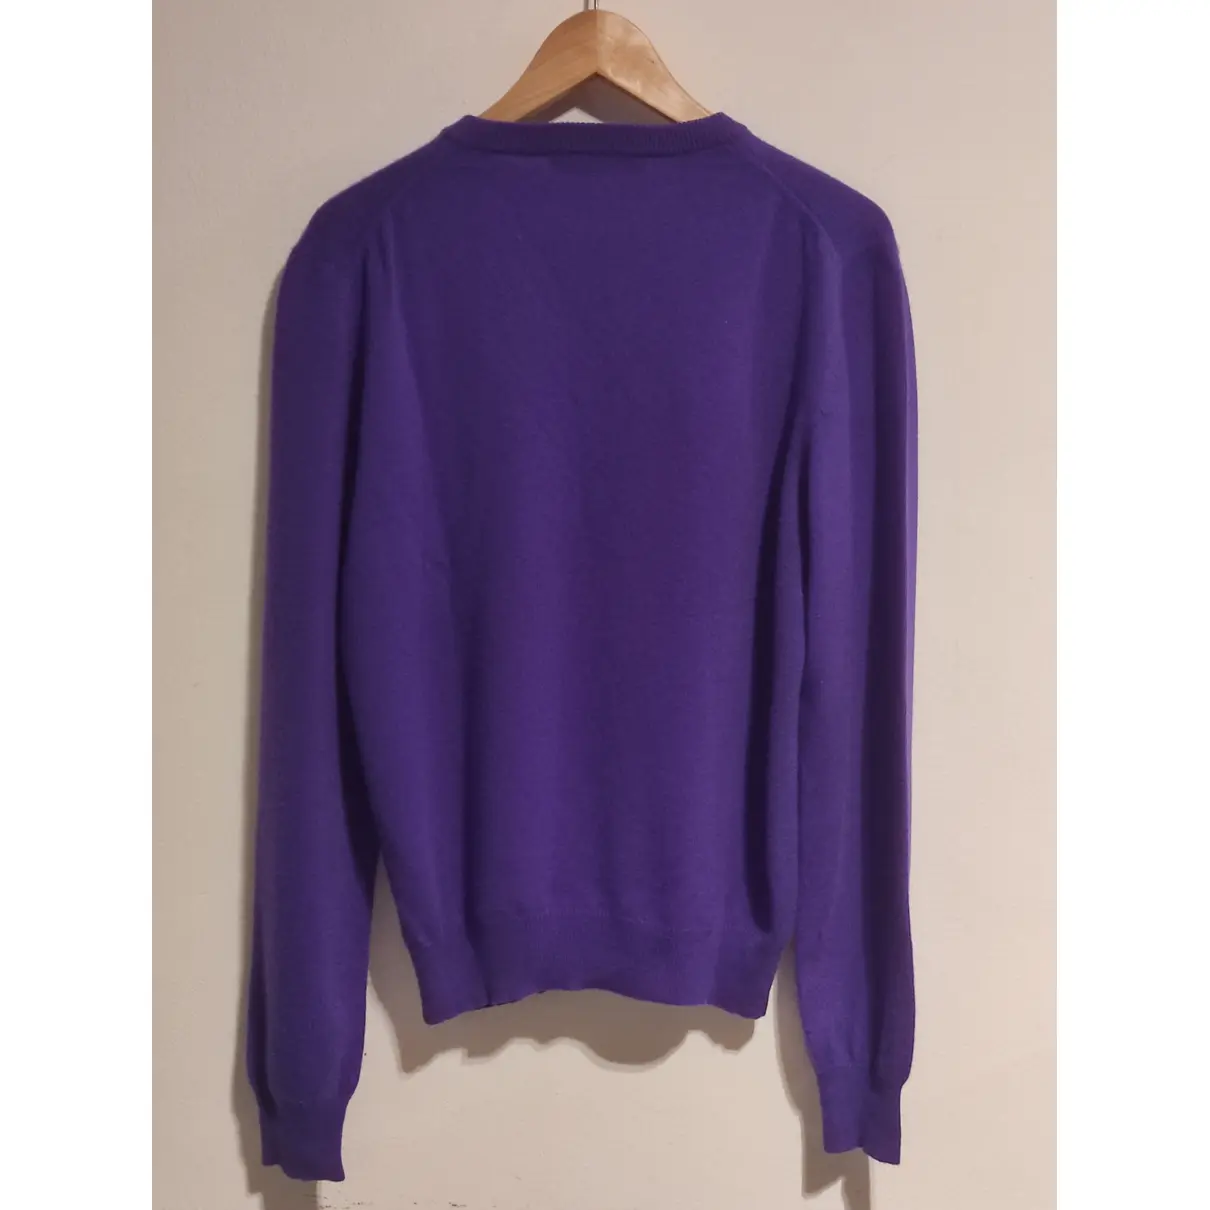 Buy Etro Cashmere pull online